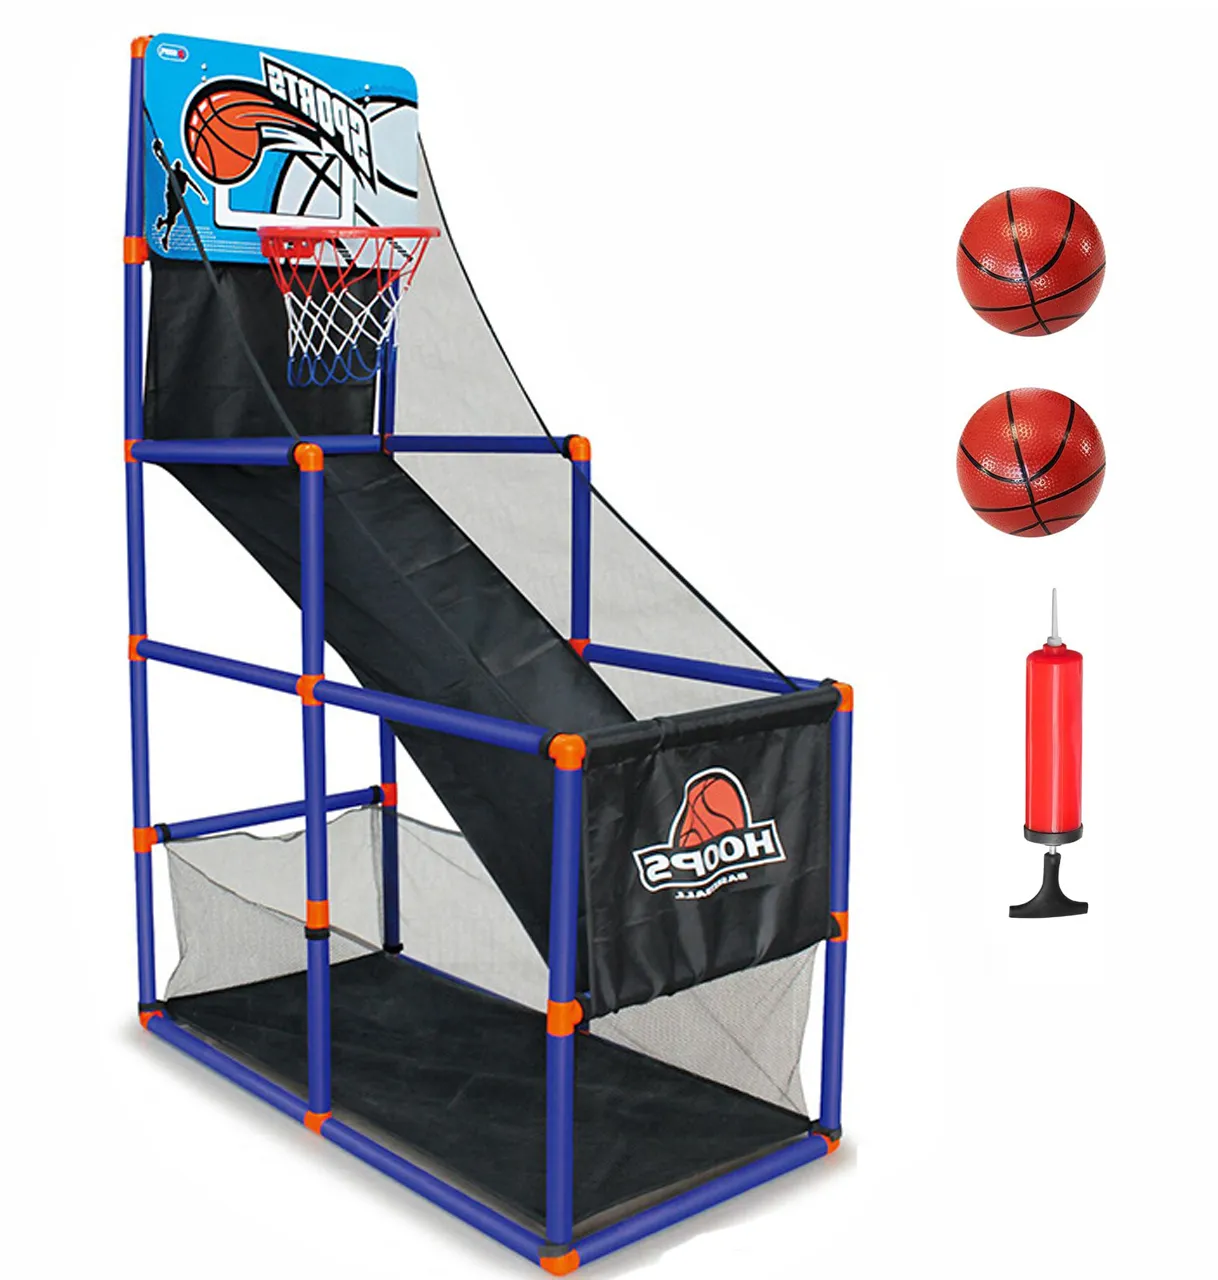 Basement Toys Arcade Basketball Hoop Game Shootout Kids Indoor Outdoor Sports Toys Fun and Entertaining Blue